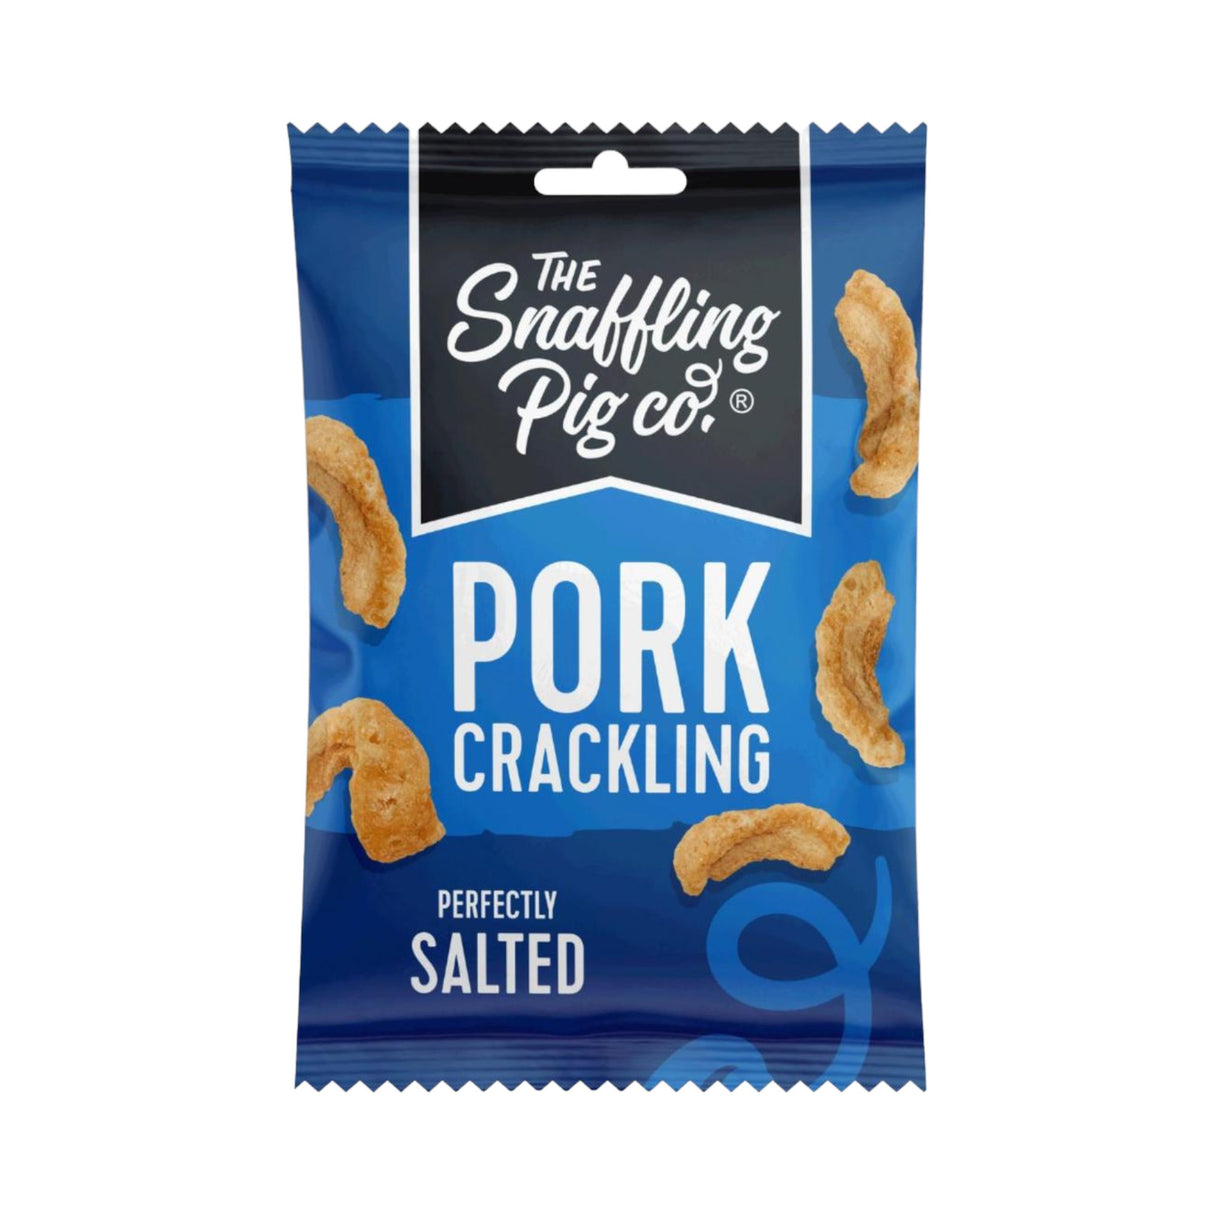 The Snaffling Pig Co - Pork Crackling - Perfectly Salted (CS) 40g